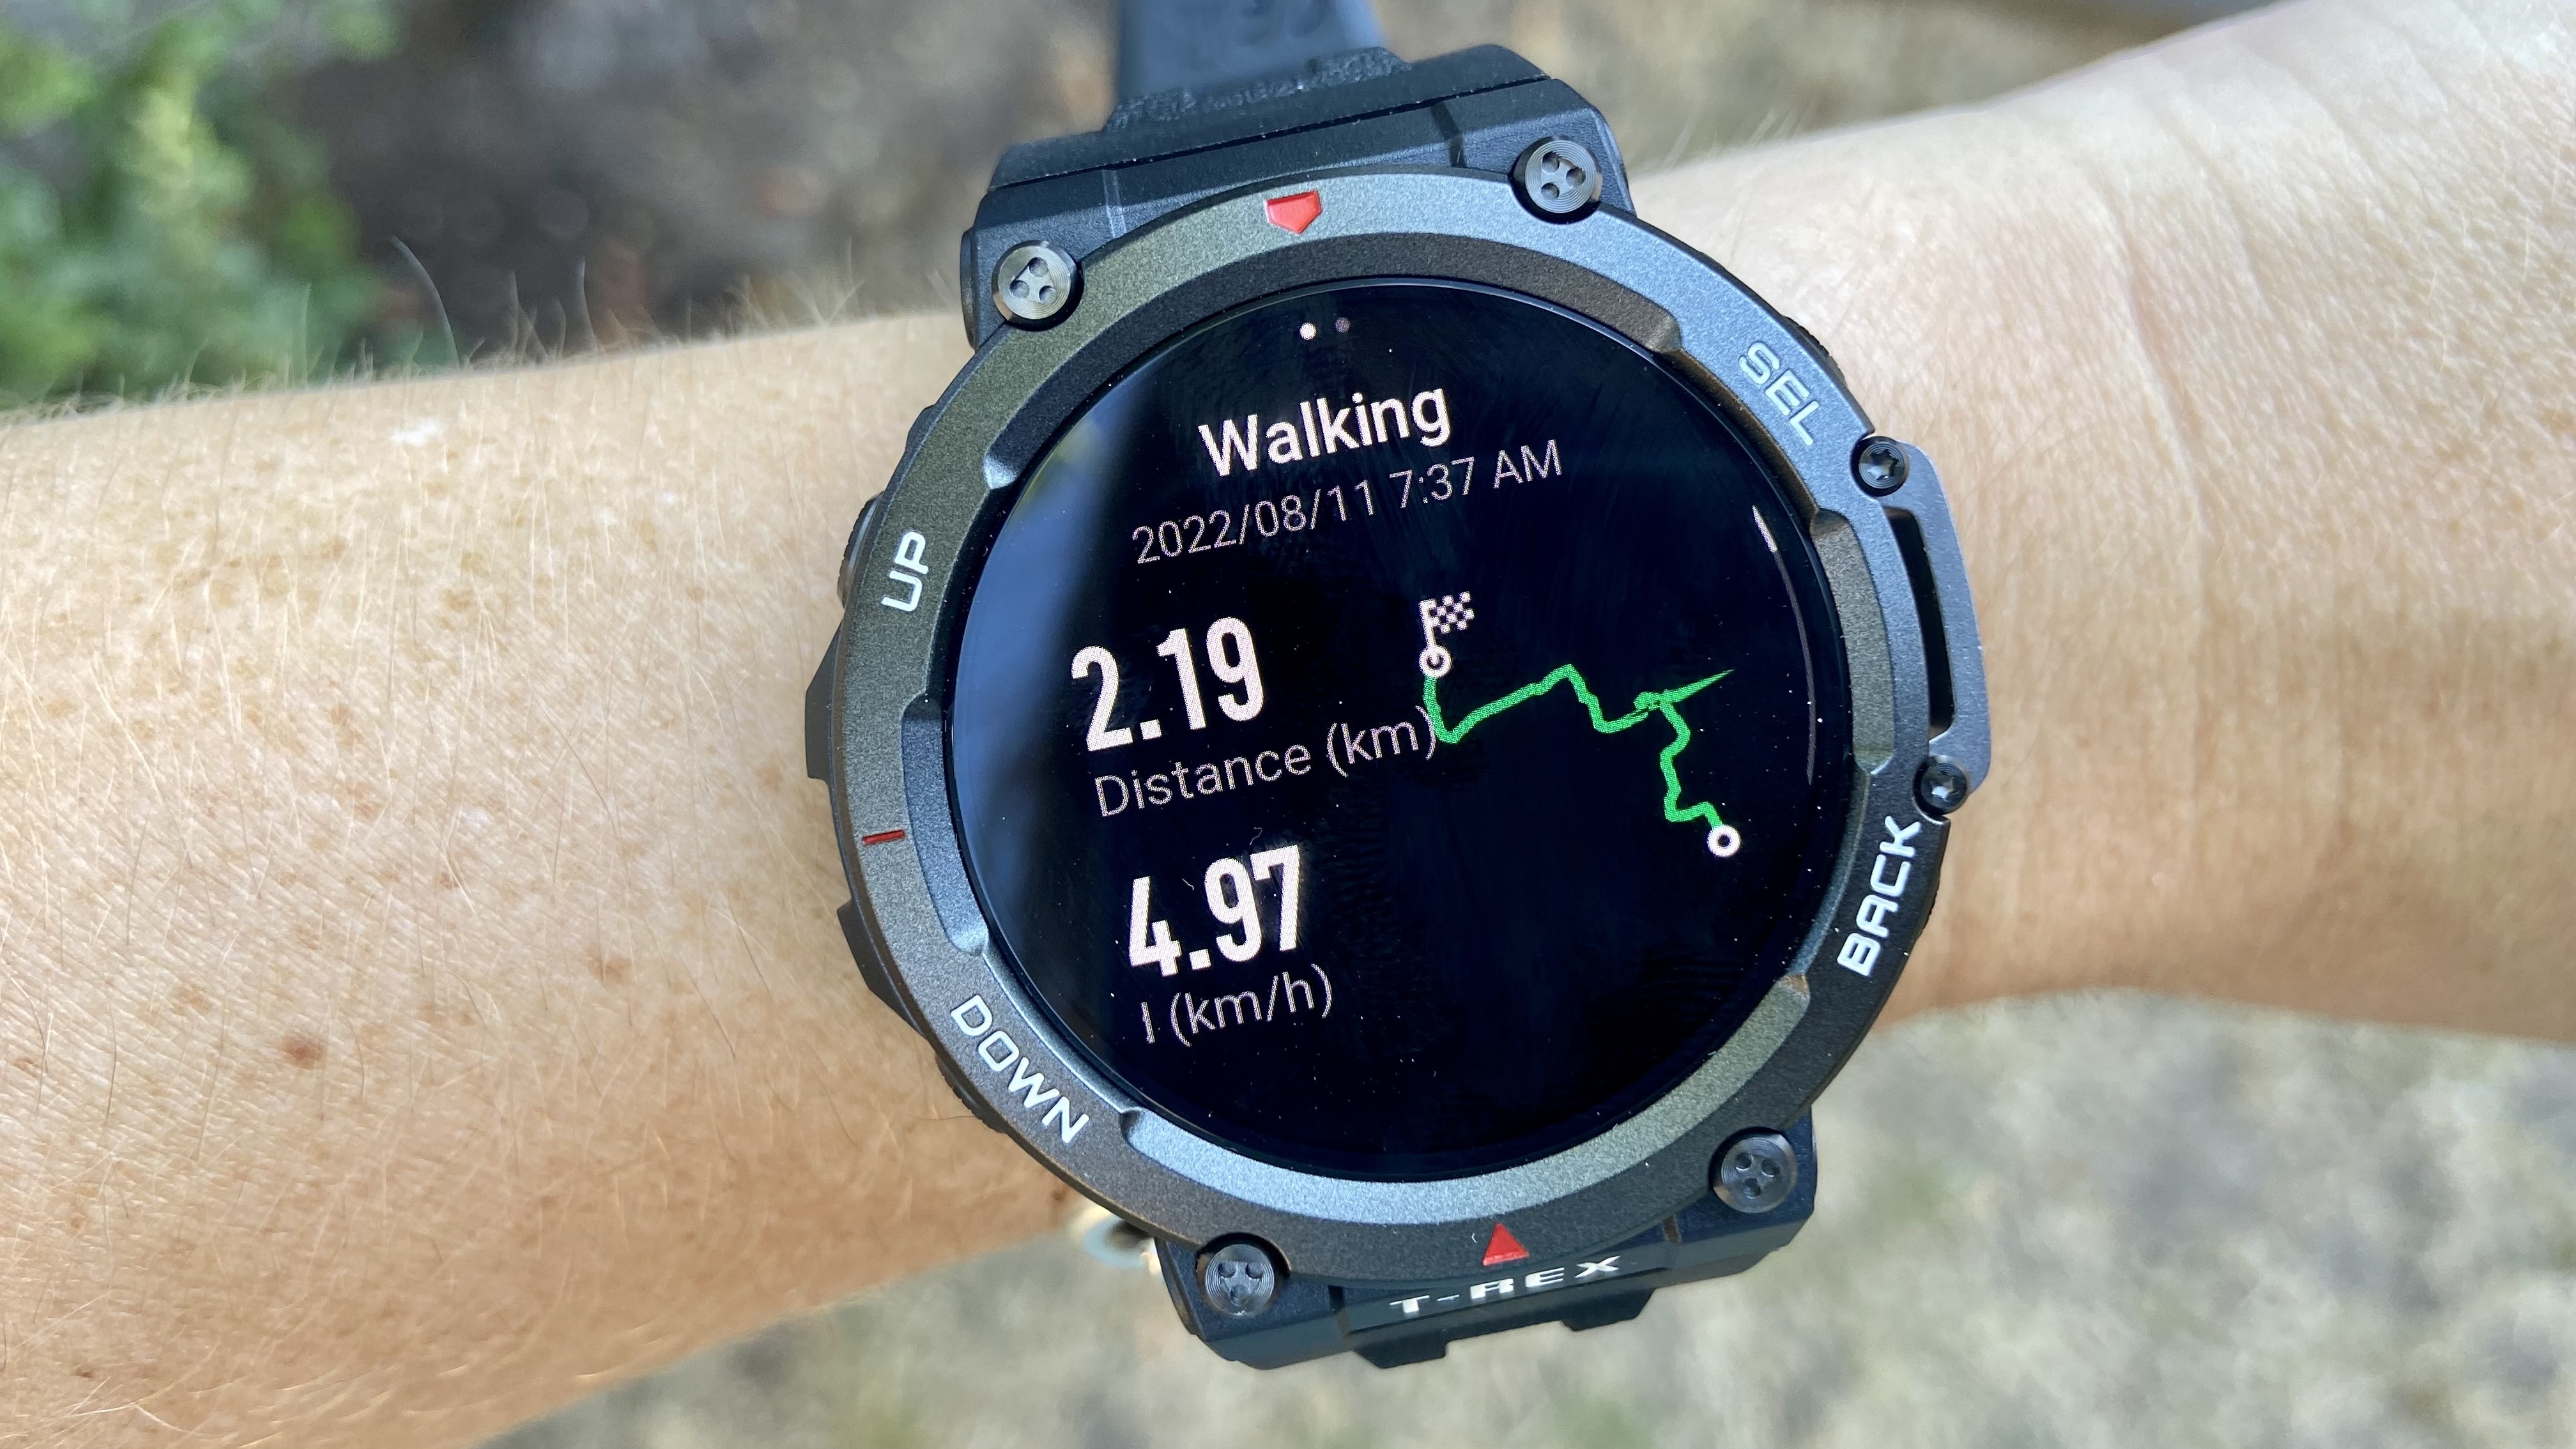 Post-workout screenshot on the amazfit t rex 2